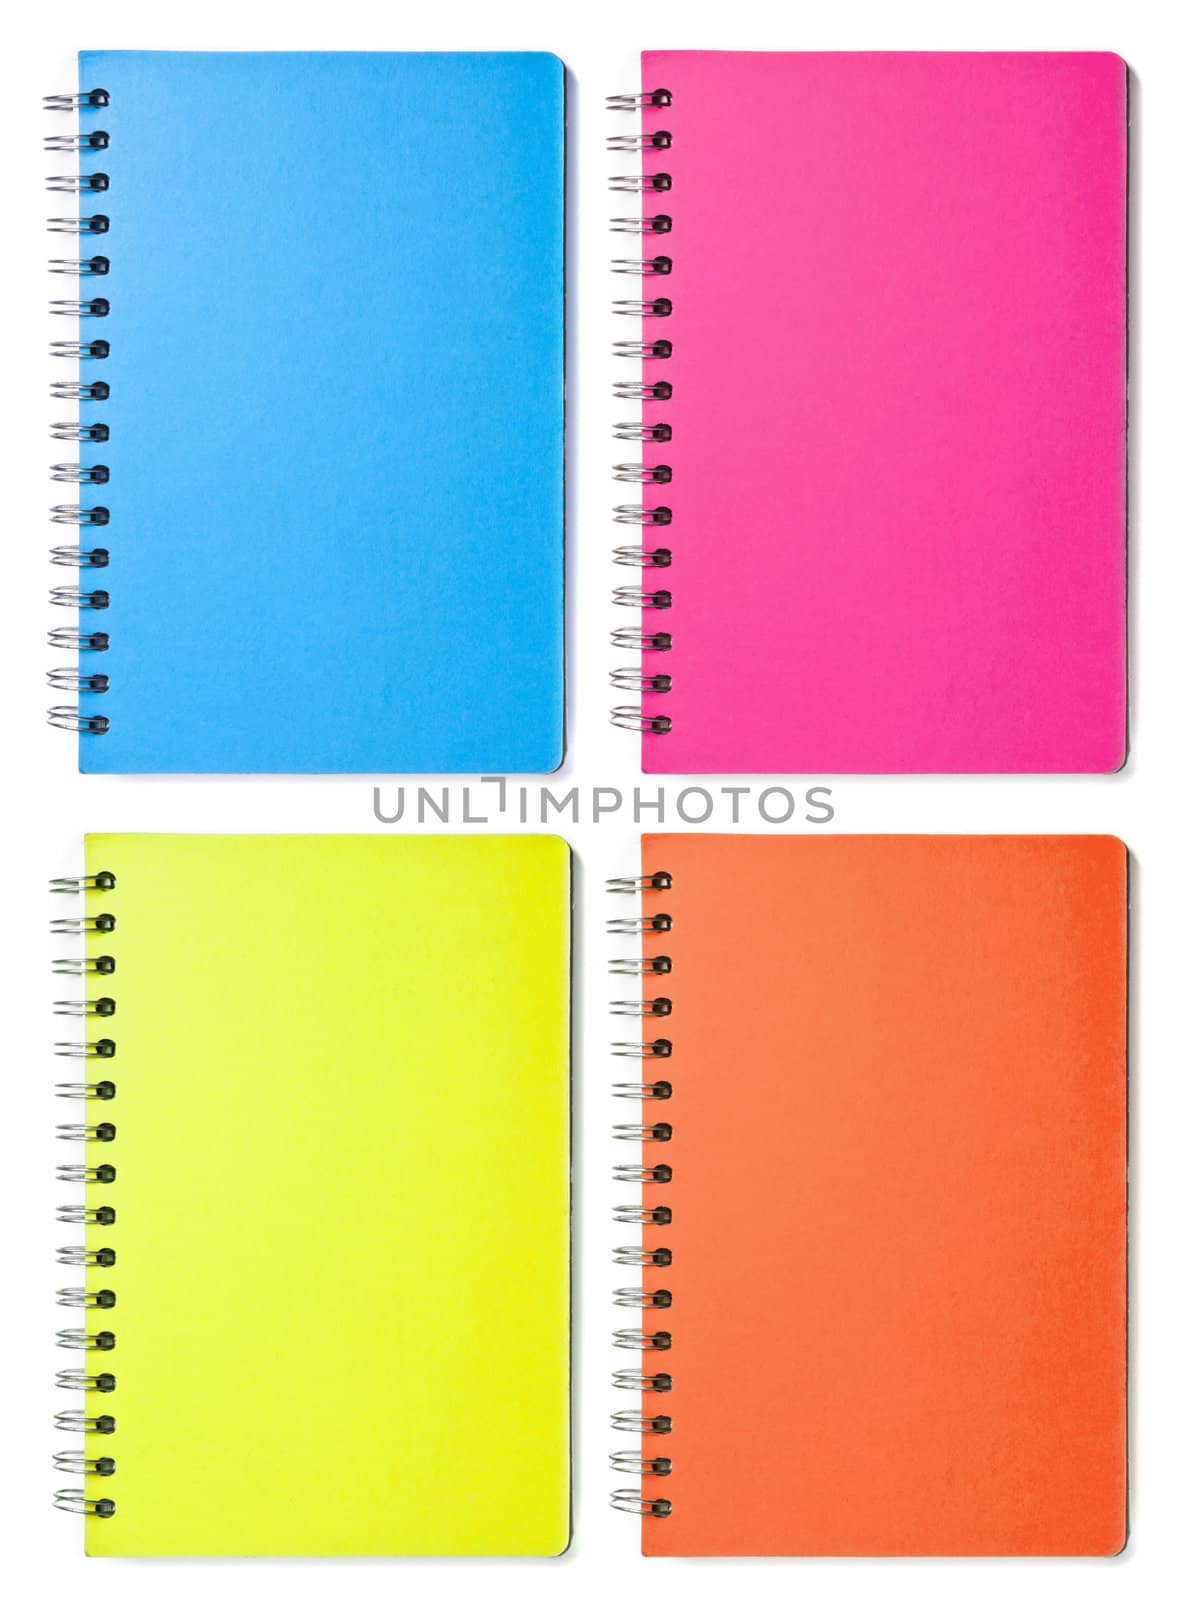 Isolated image of four colored blank vertical spiral notebooks